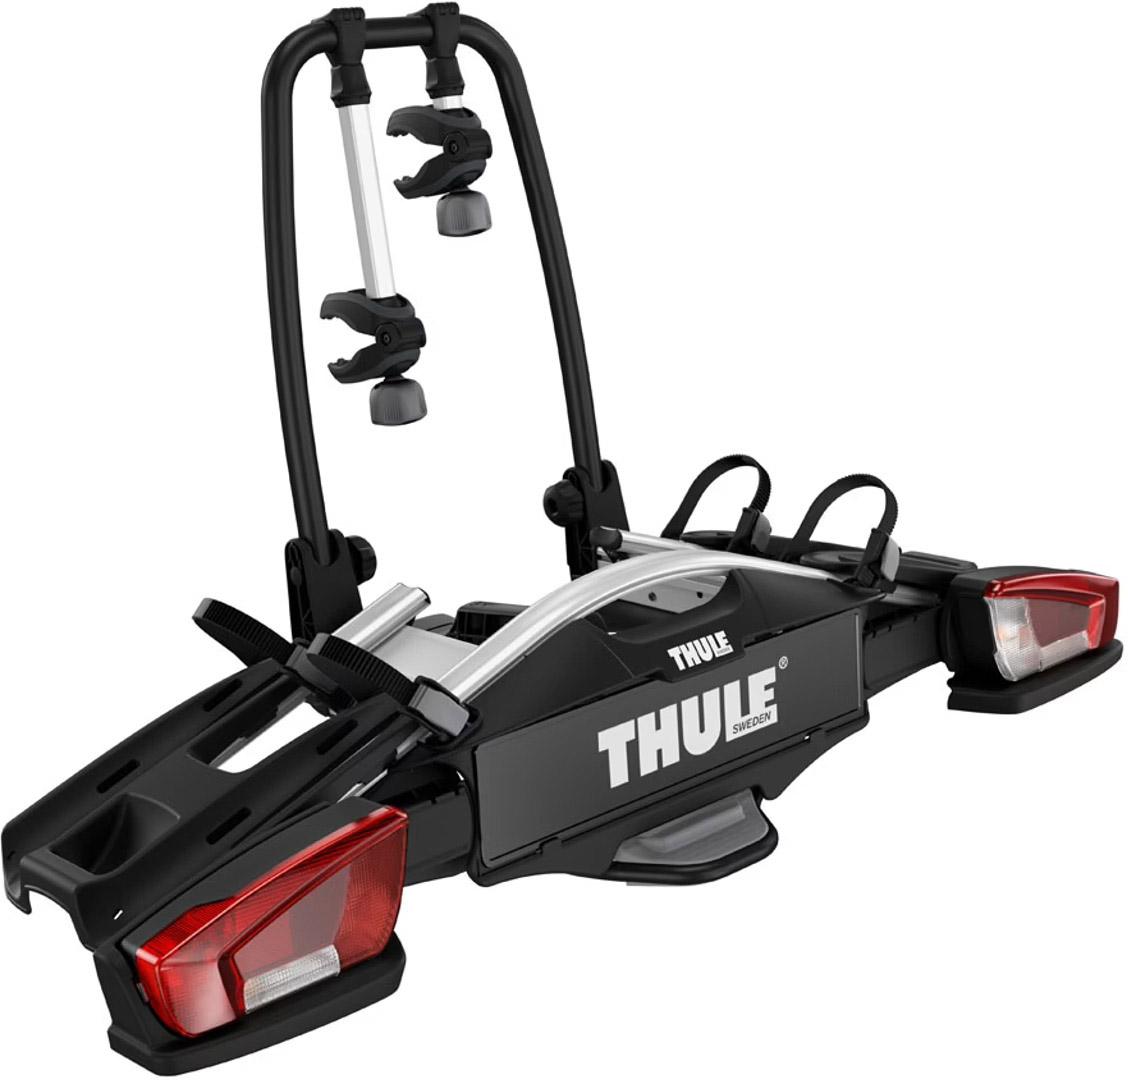 Thule 924021 Velocompact 2-bike Towball Carrier - Black/silver